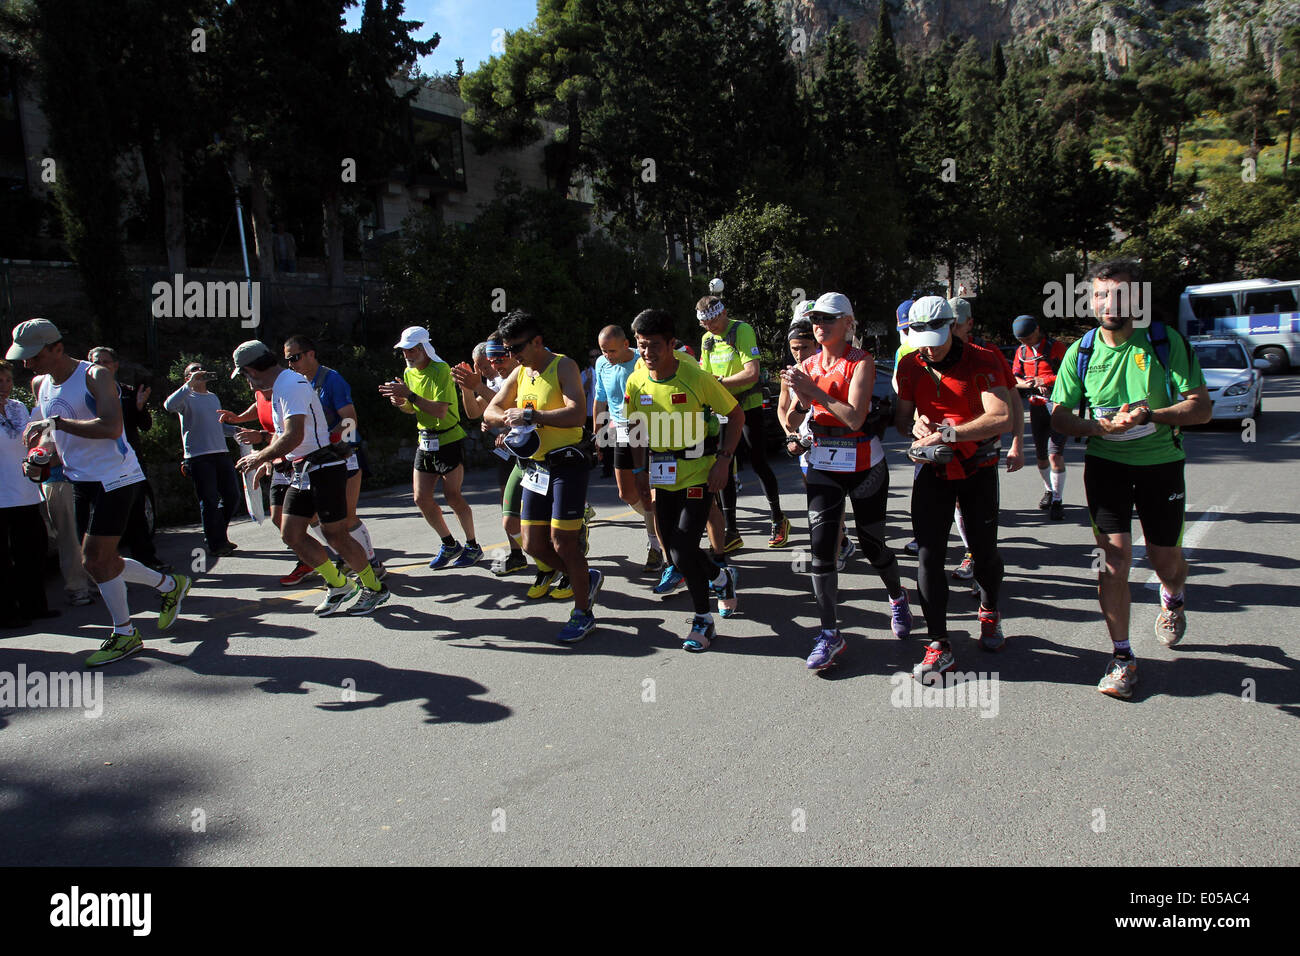 Athens. 2nd May, 2014. Participants in the 3rd Dolichos Ultra Marathon starts running in front of the archaeological site of Delphi in central Greece on May 2, 2014. A total of 26 athletes, among them a Chinese, aim to run nonstop to Sunday afternoon the 255 kilometers course to Olympia, the birthplace of the Olympic Games. © Marios Lolos/Xinhua/Alamy Live News Stock Photo